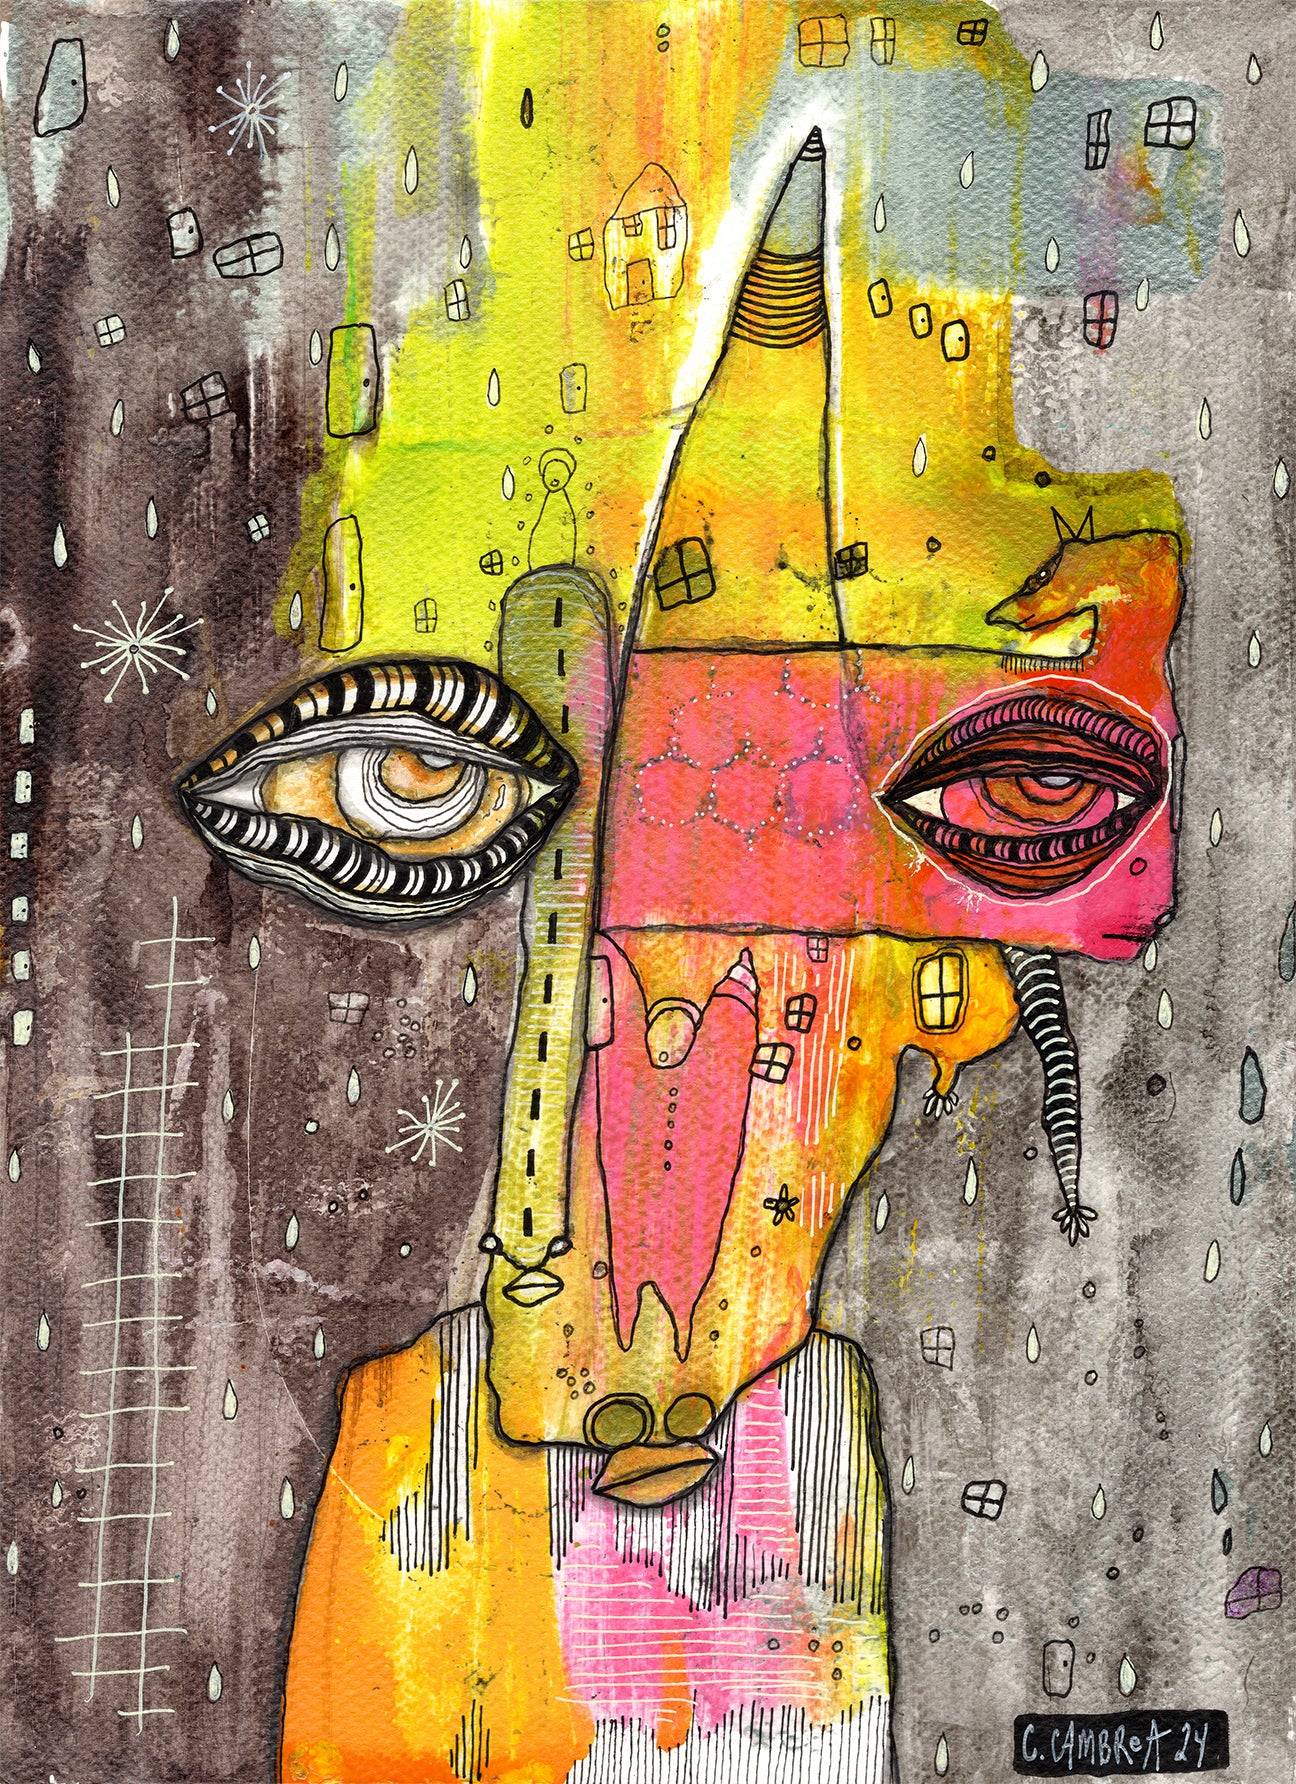 "We're all here" Original Mixed Media art on Watercolor Paper